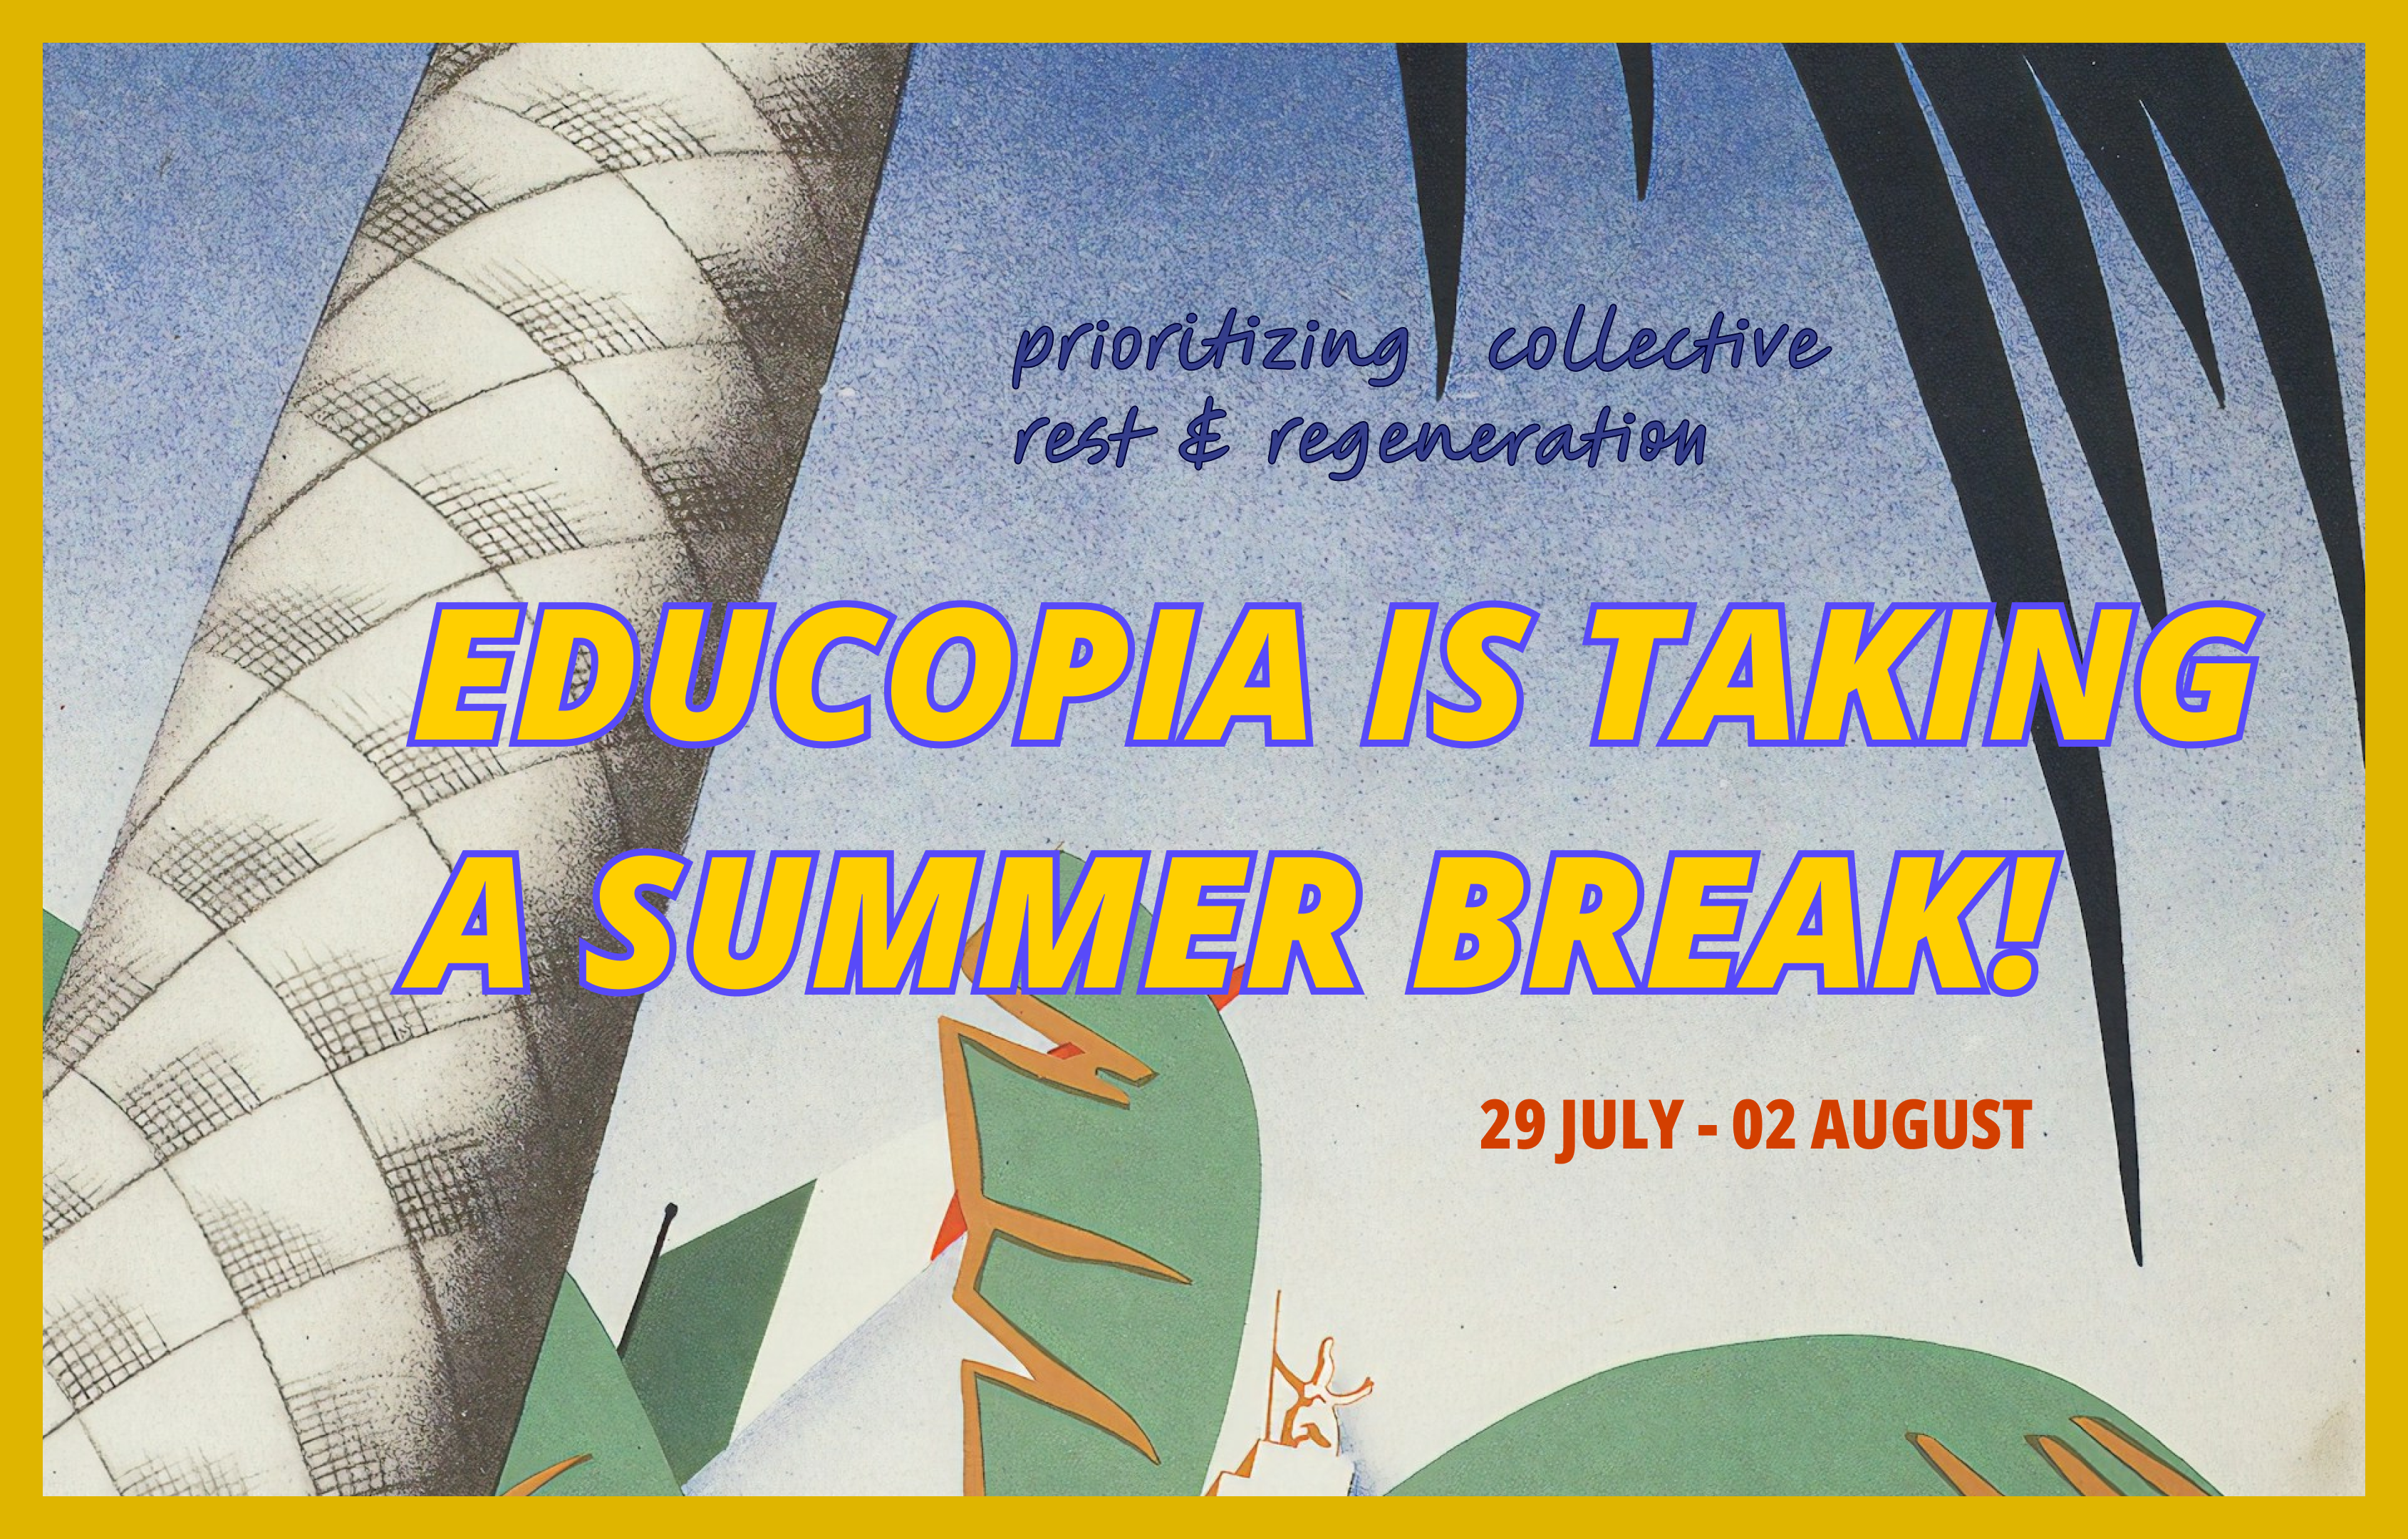 Prioritizing collective rest and regeneration, Educopia is taking a summer break from 29 July to 02 August